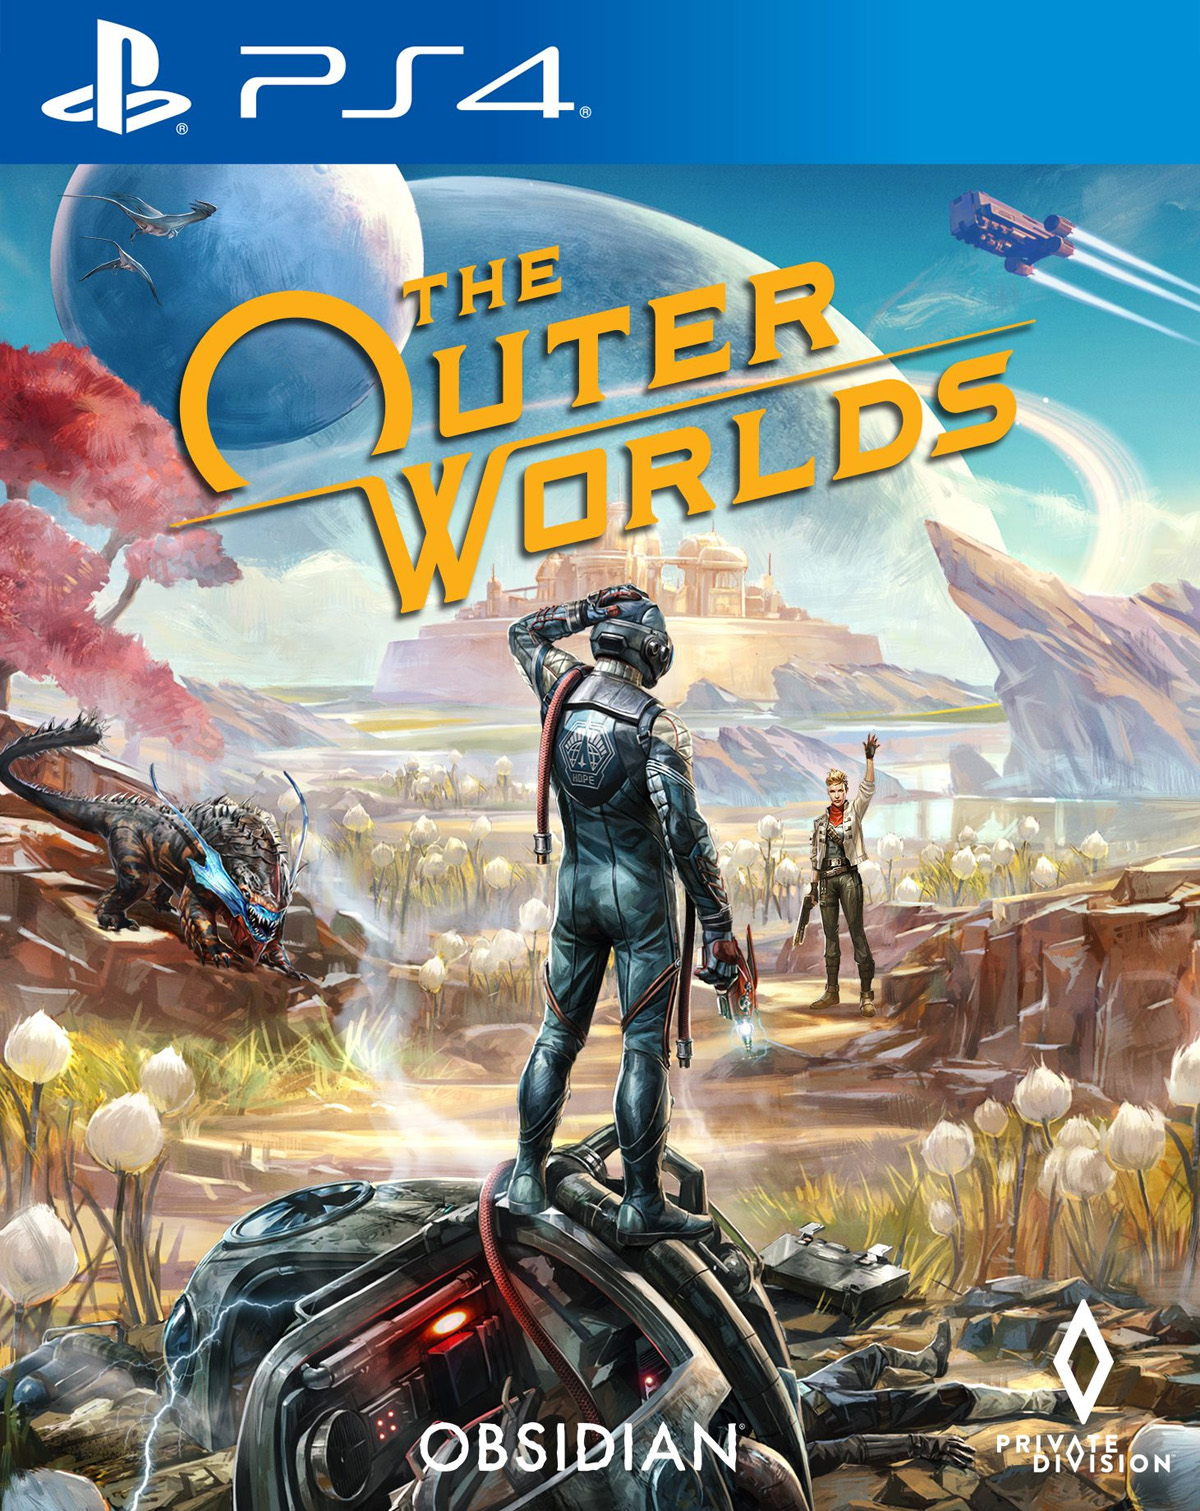 The Outer Worlds [PS4] 5.05 / 6.72 / 7.02 / 7.55 [EUR] (2019) [Русский] (v1.04)